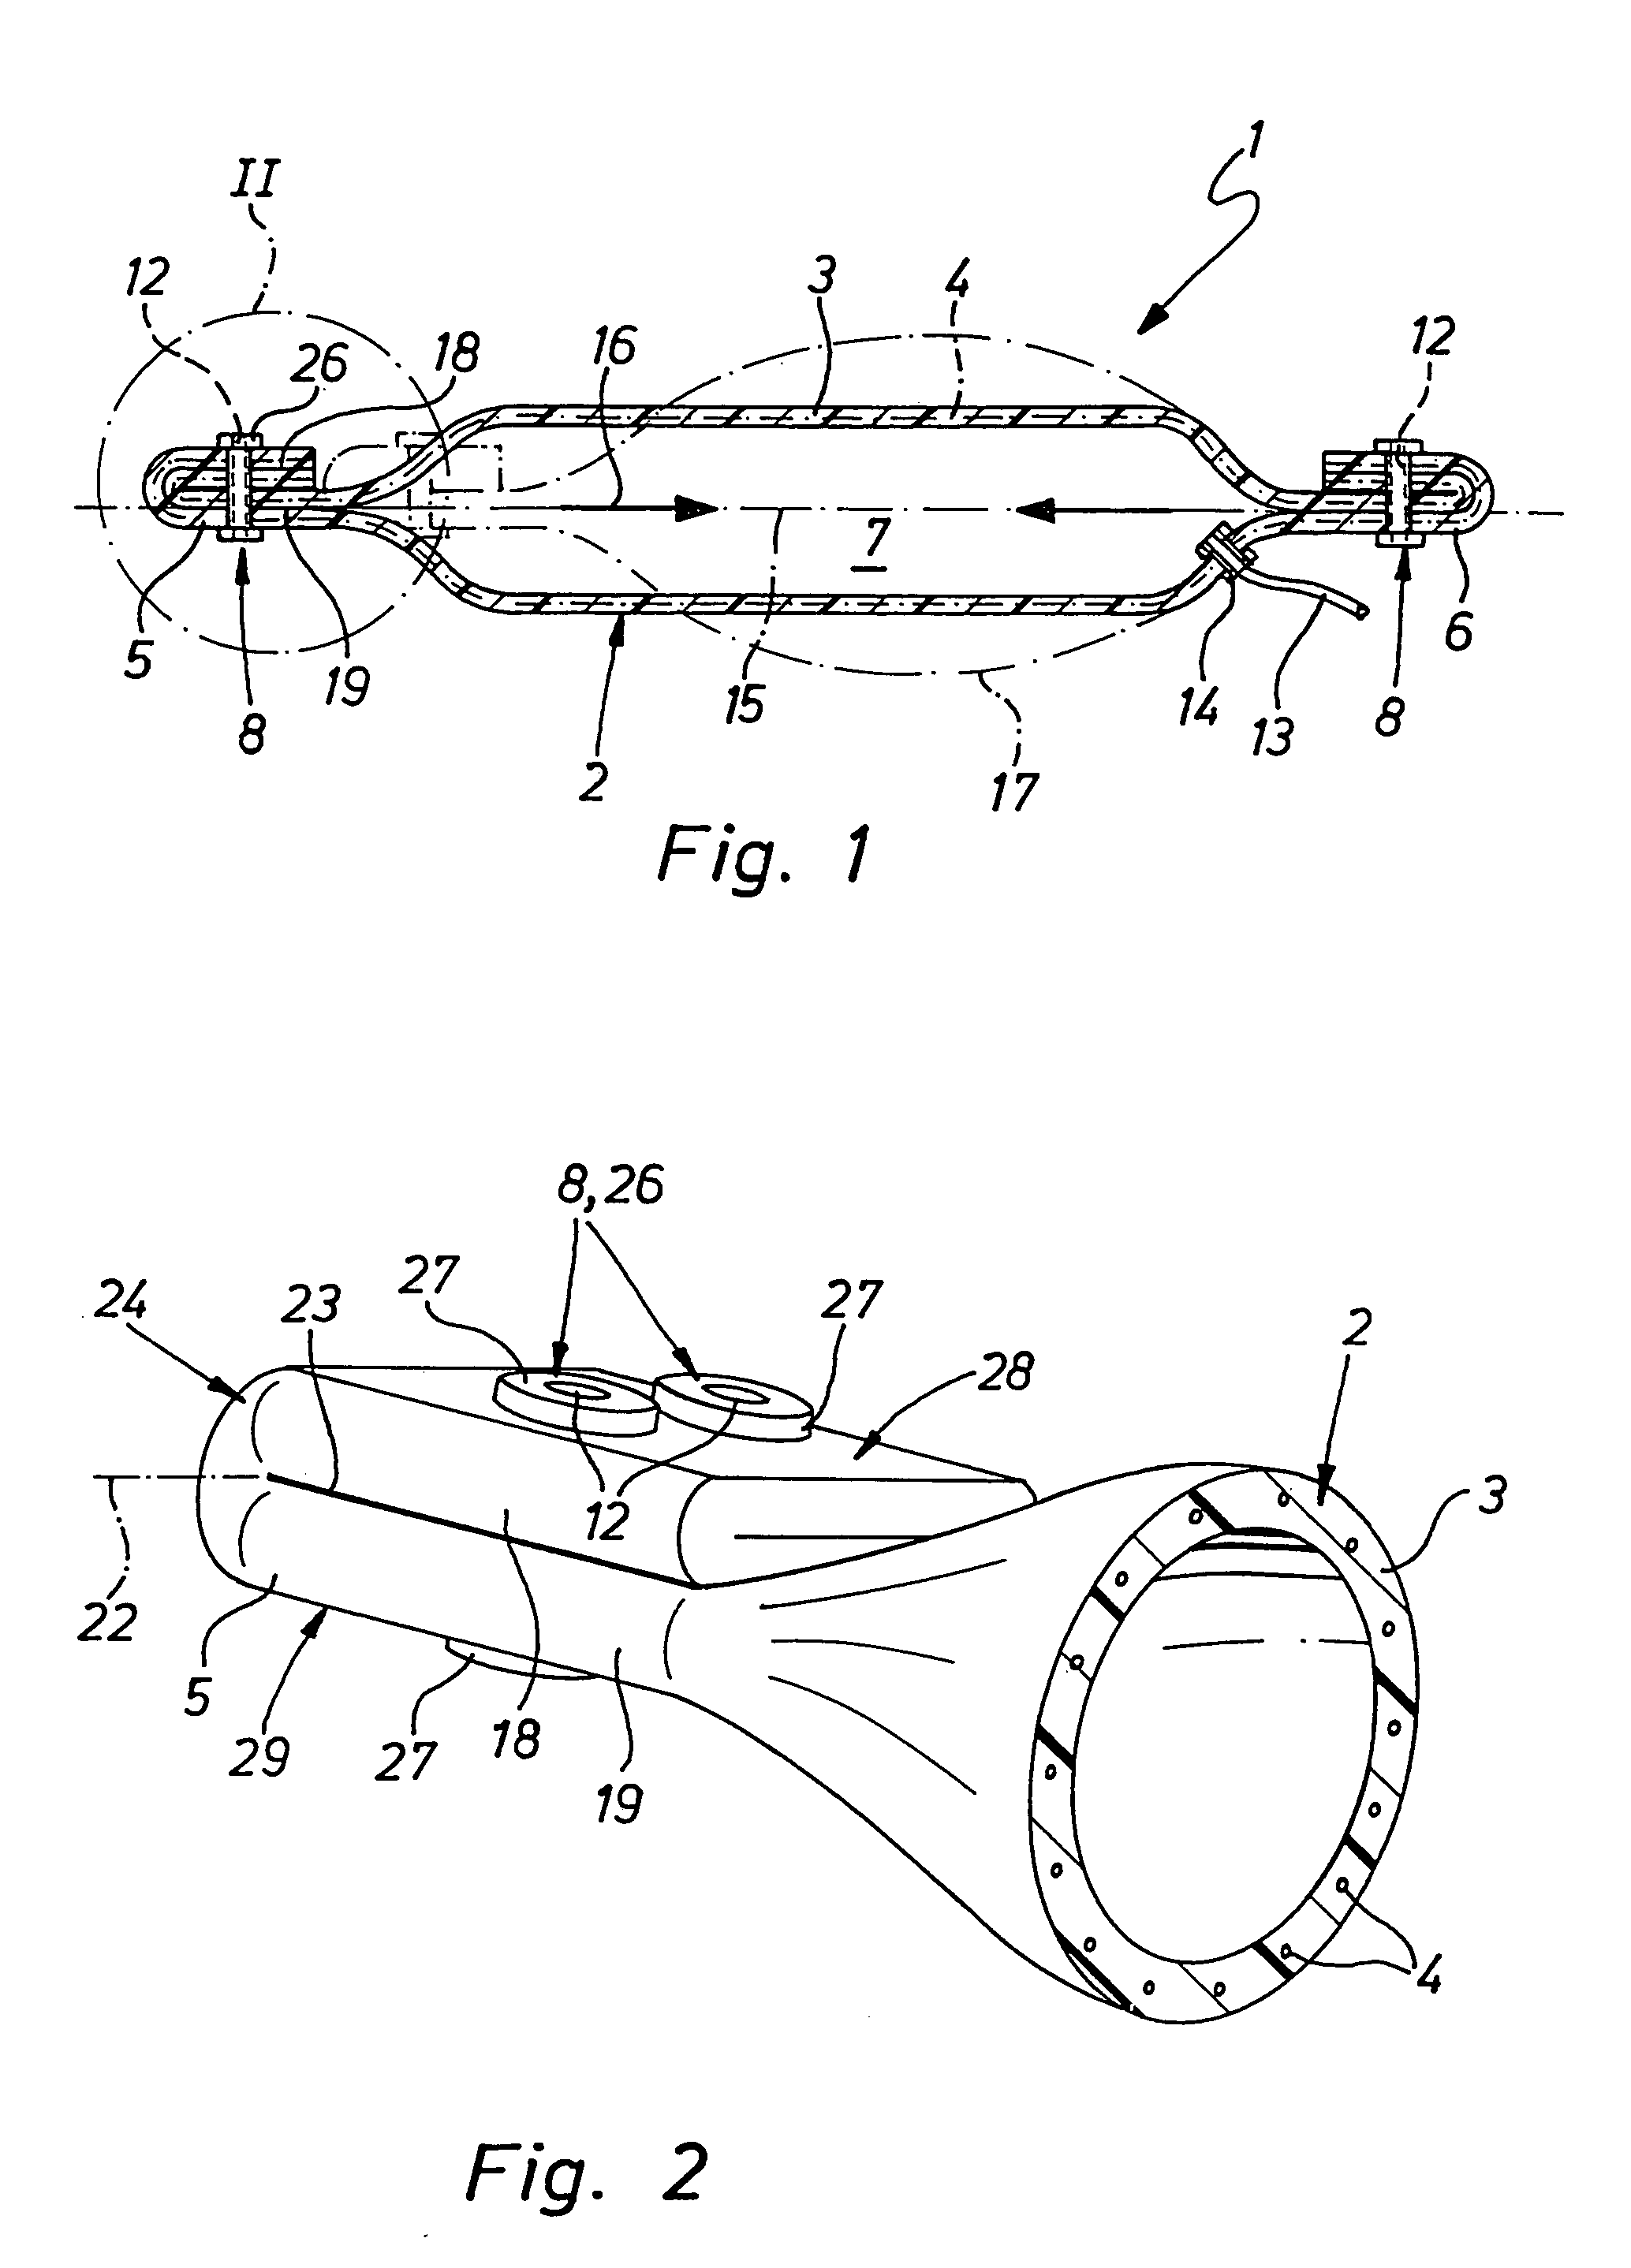 Fluid-actuated contraction drive and associated contraction tube